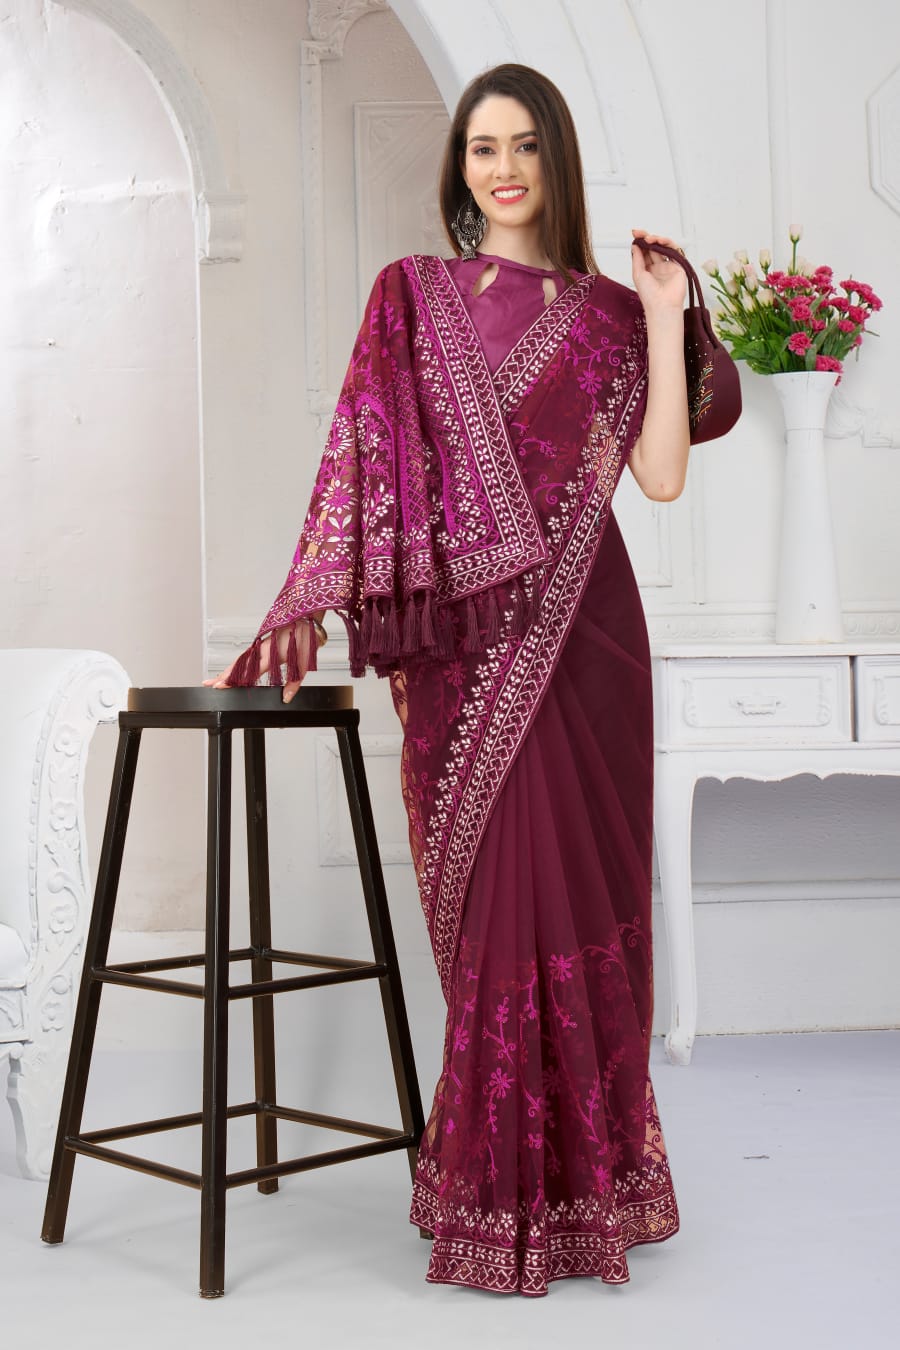 Taj Heavy Butterfly Net Saree Anant Tex Exports Private Limited